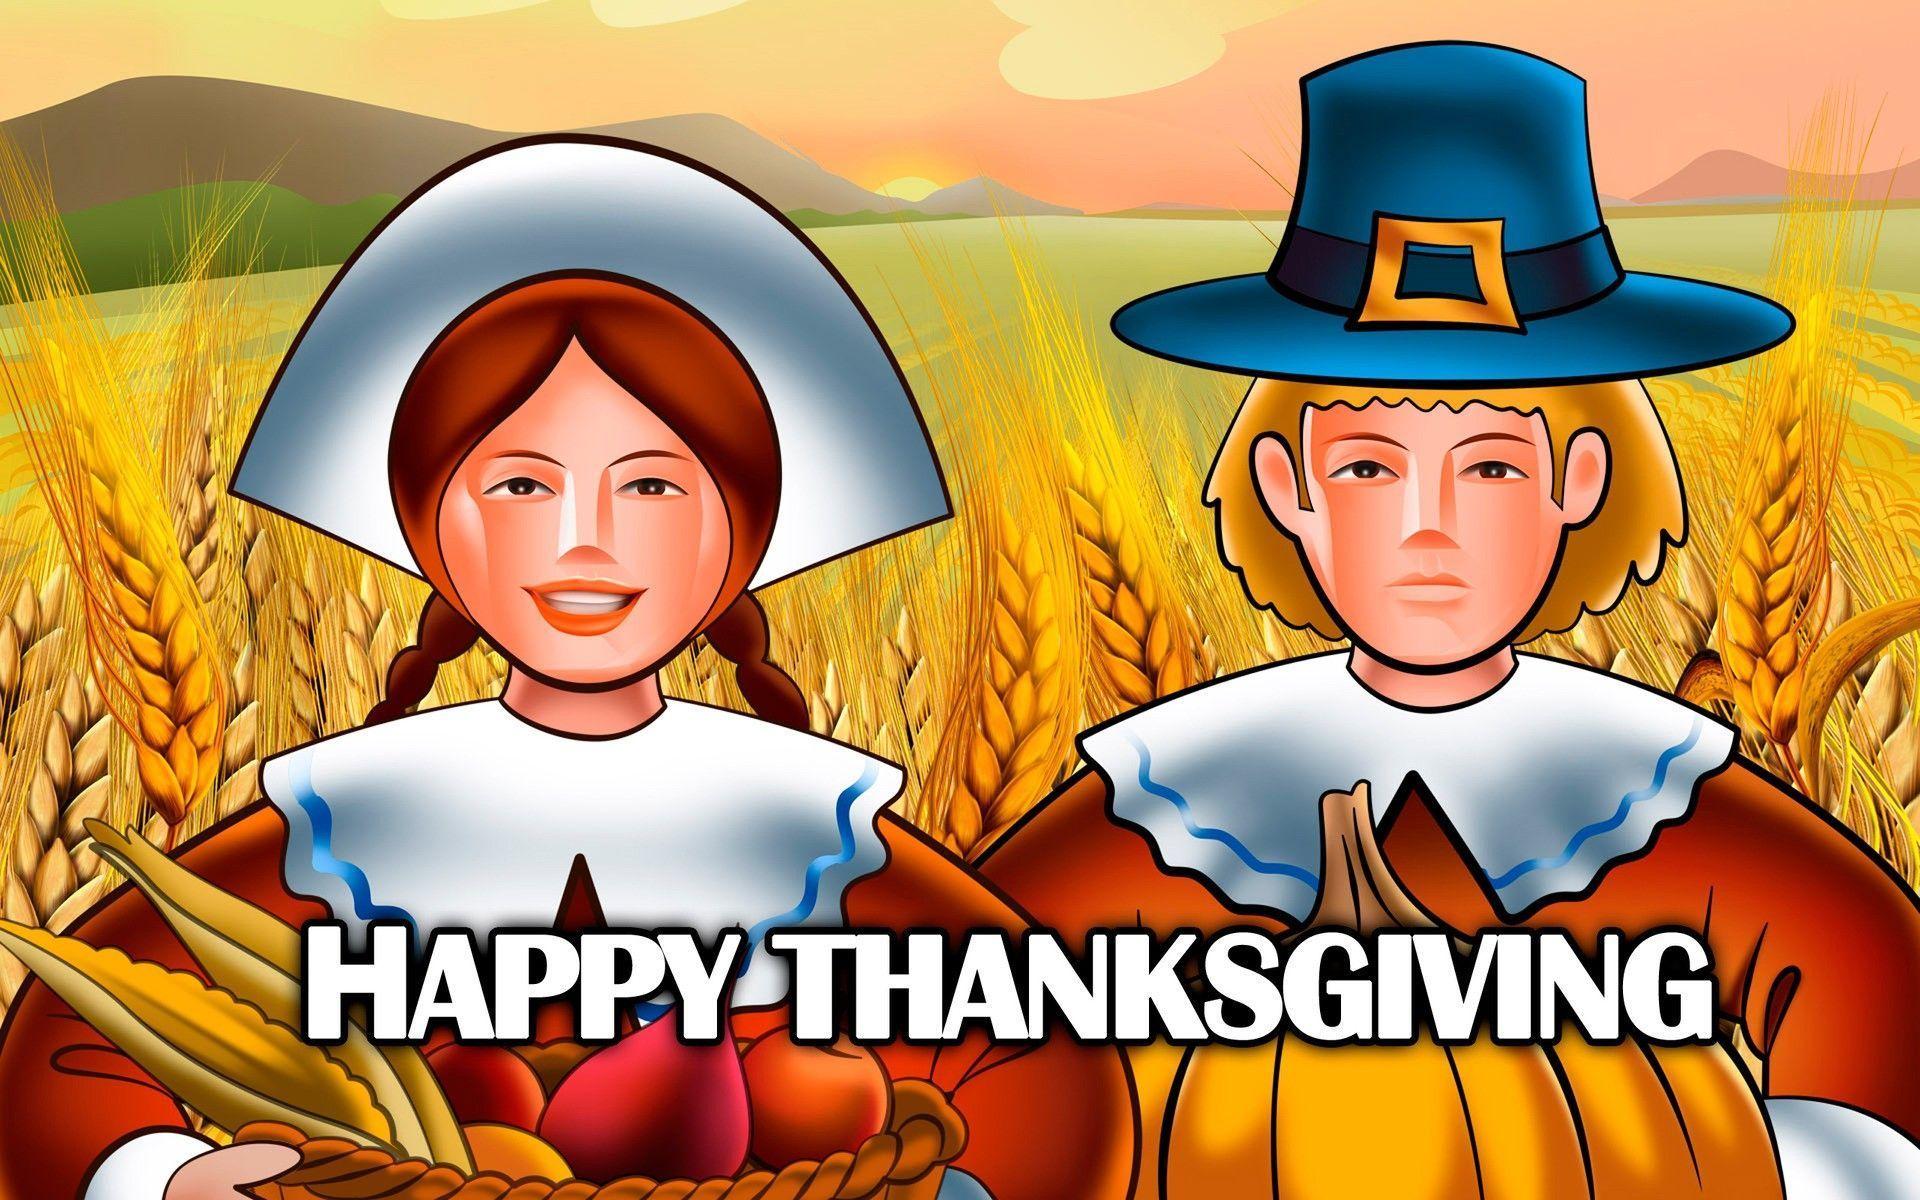 Cute Thanksgiving Image Image & Pictures